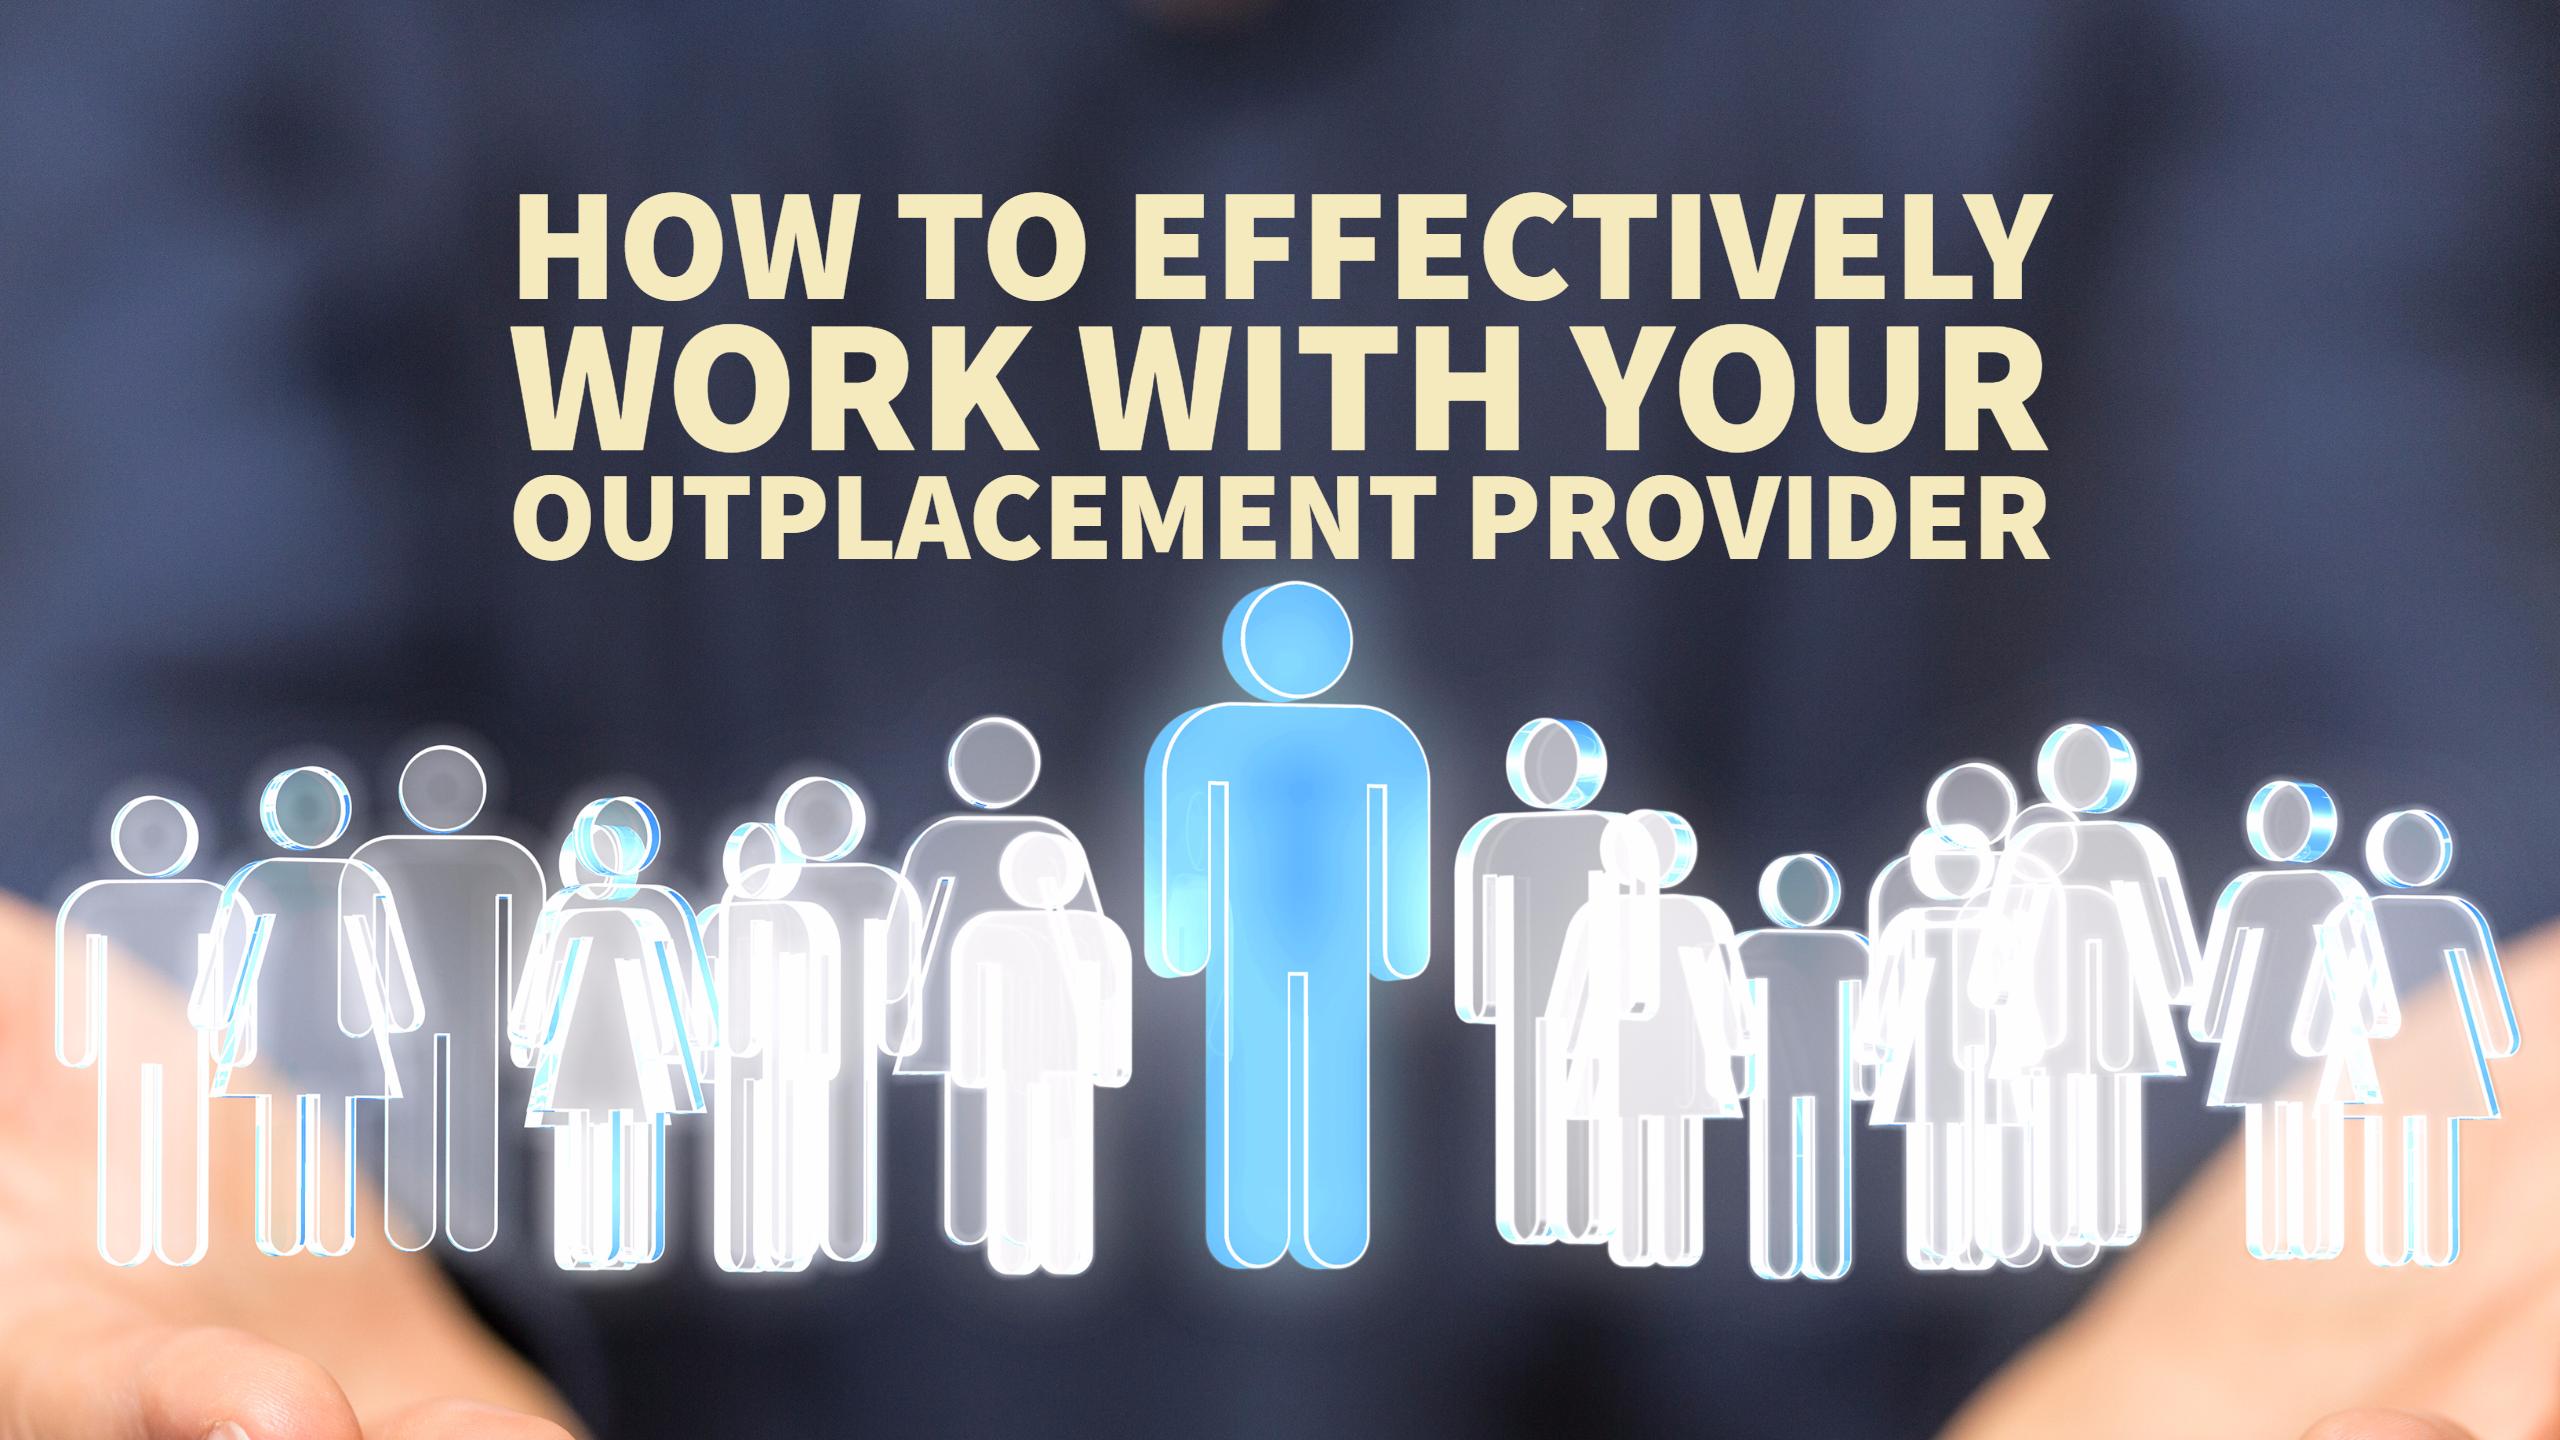 How To Effectively Work With Your Outplacement Provider